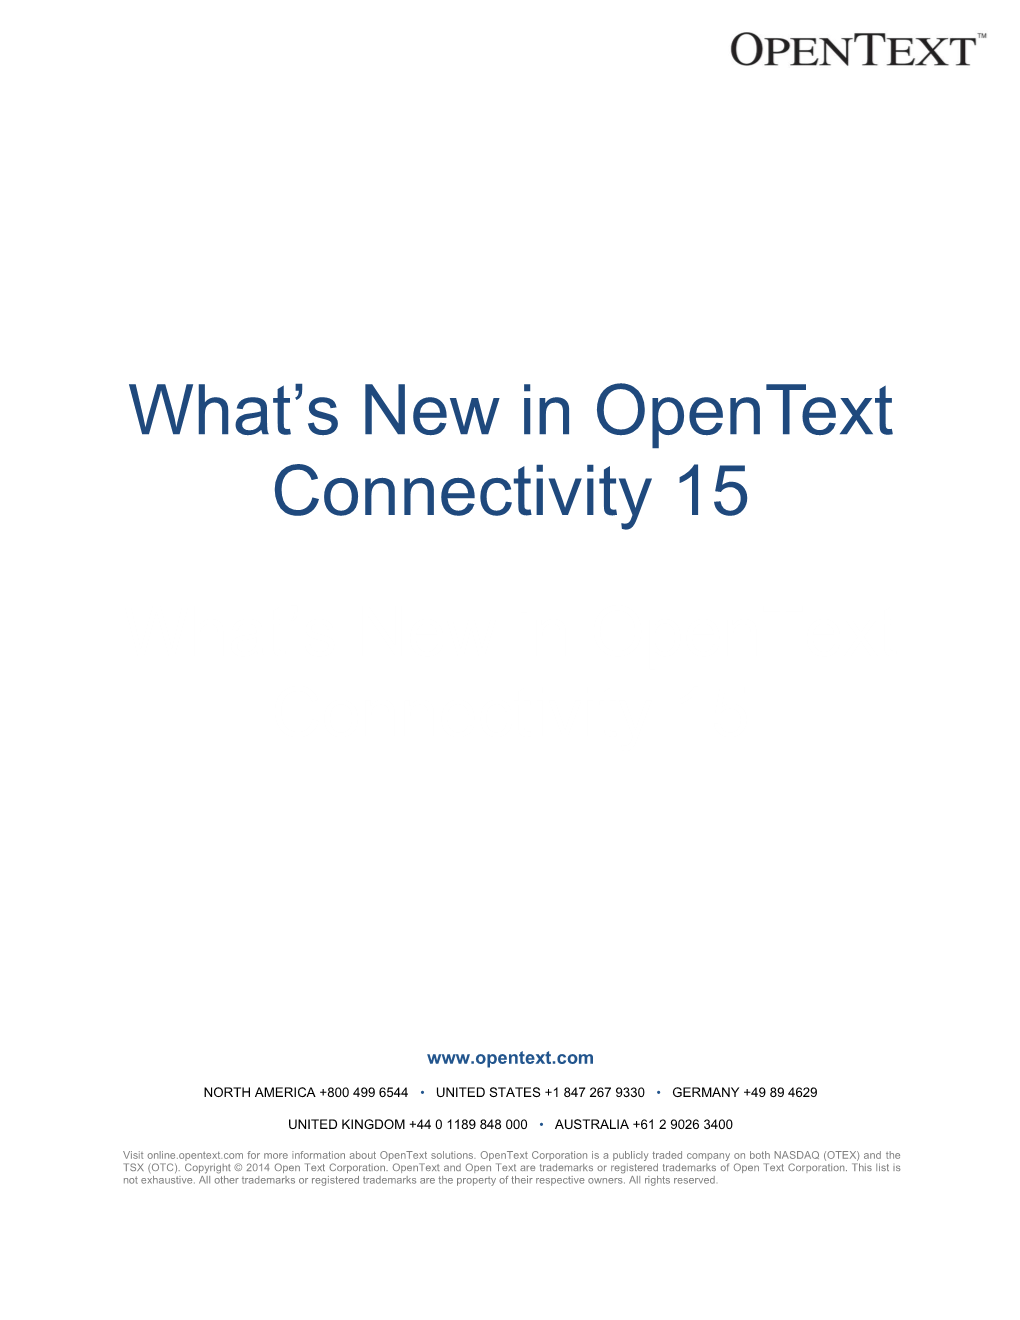 What's New in Opentext Connectivity 15